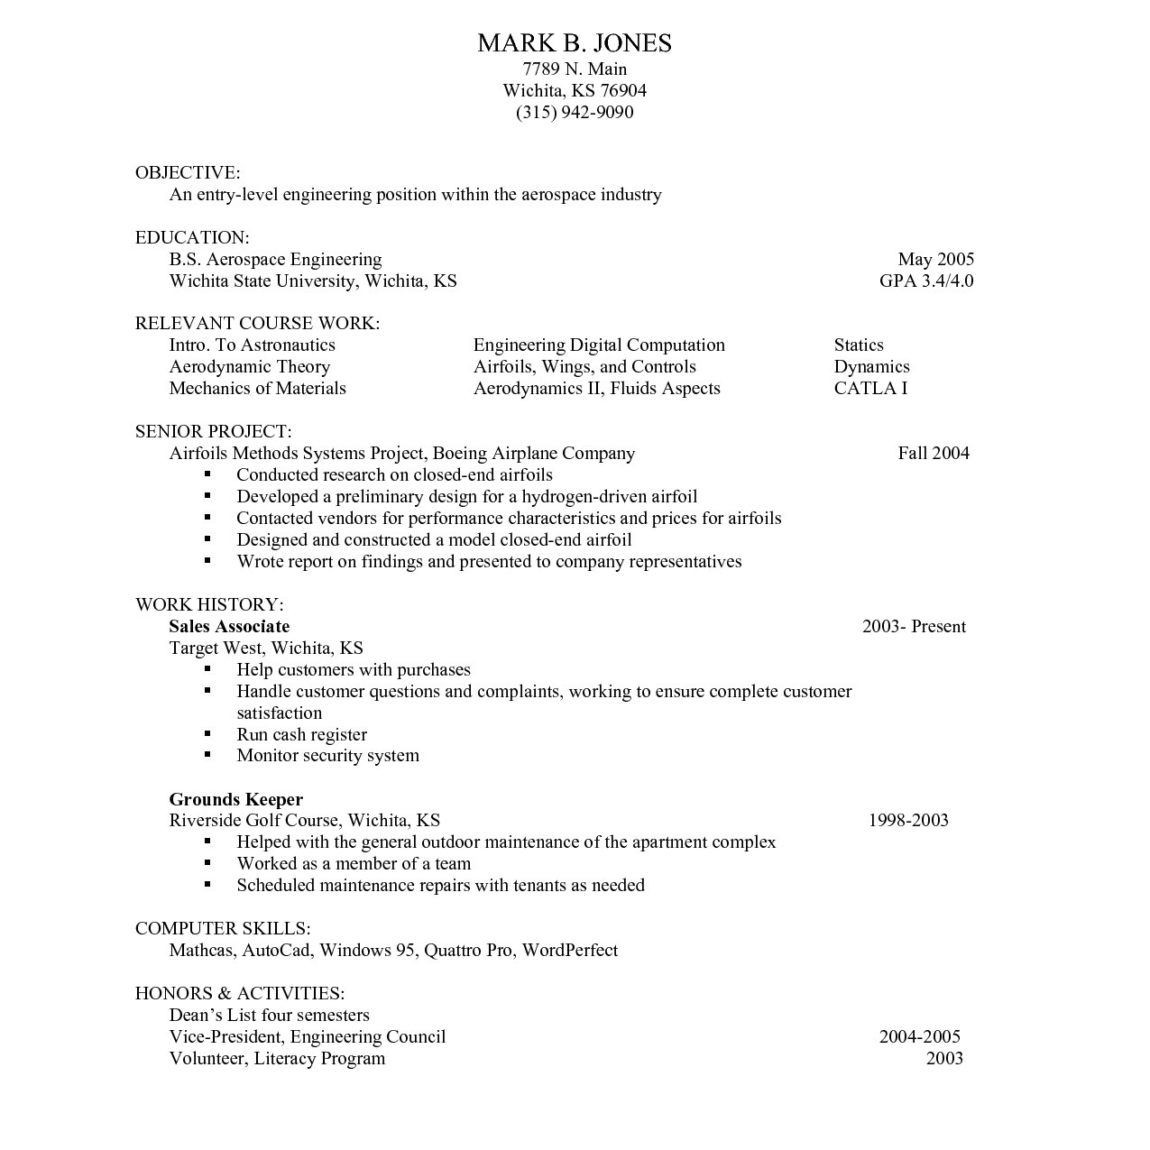 Sample Student Resume No Work Experience Enigneering Resume Examples with No Experience , #examples #experience #resume …